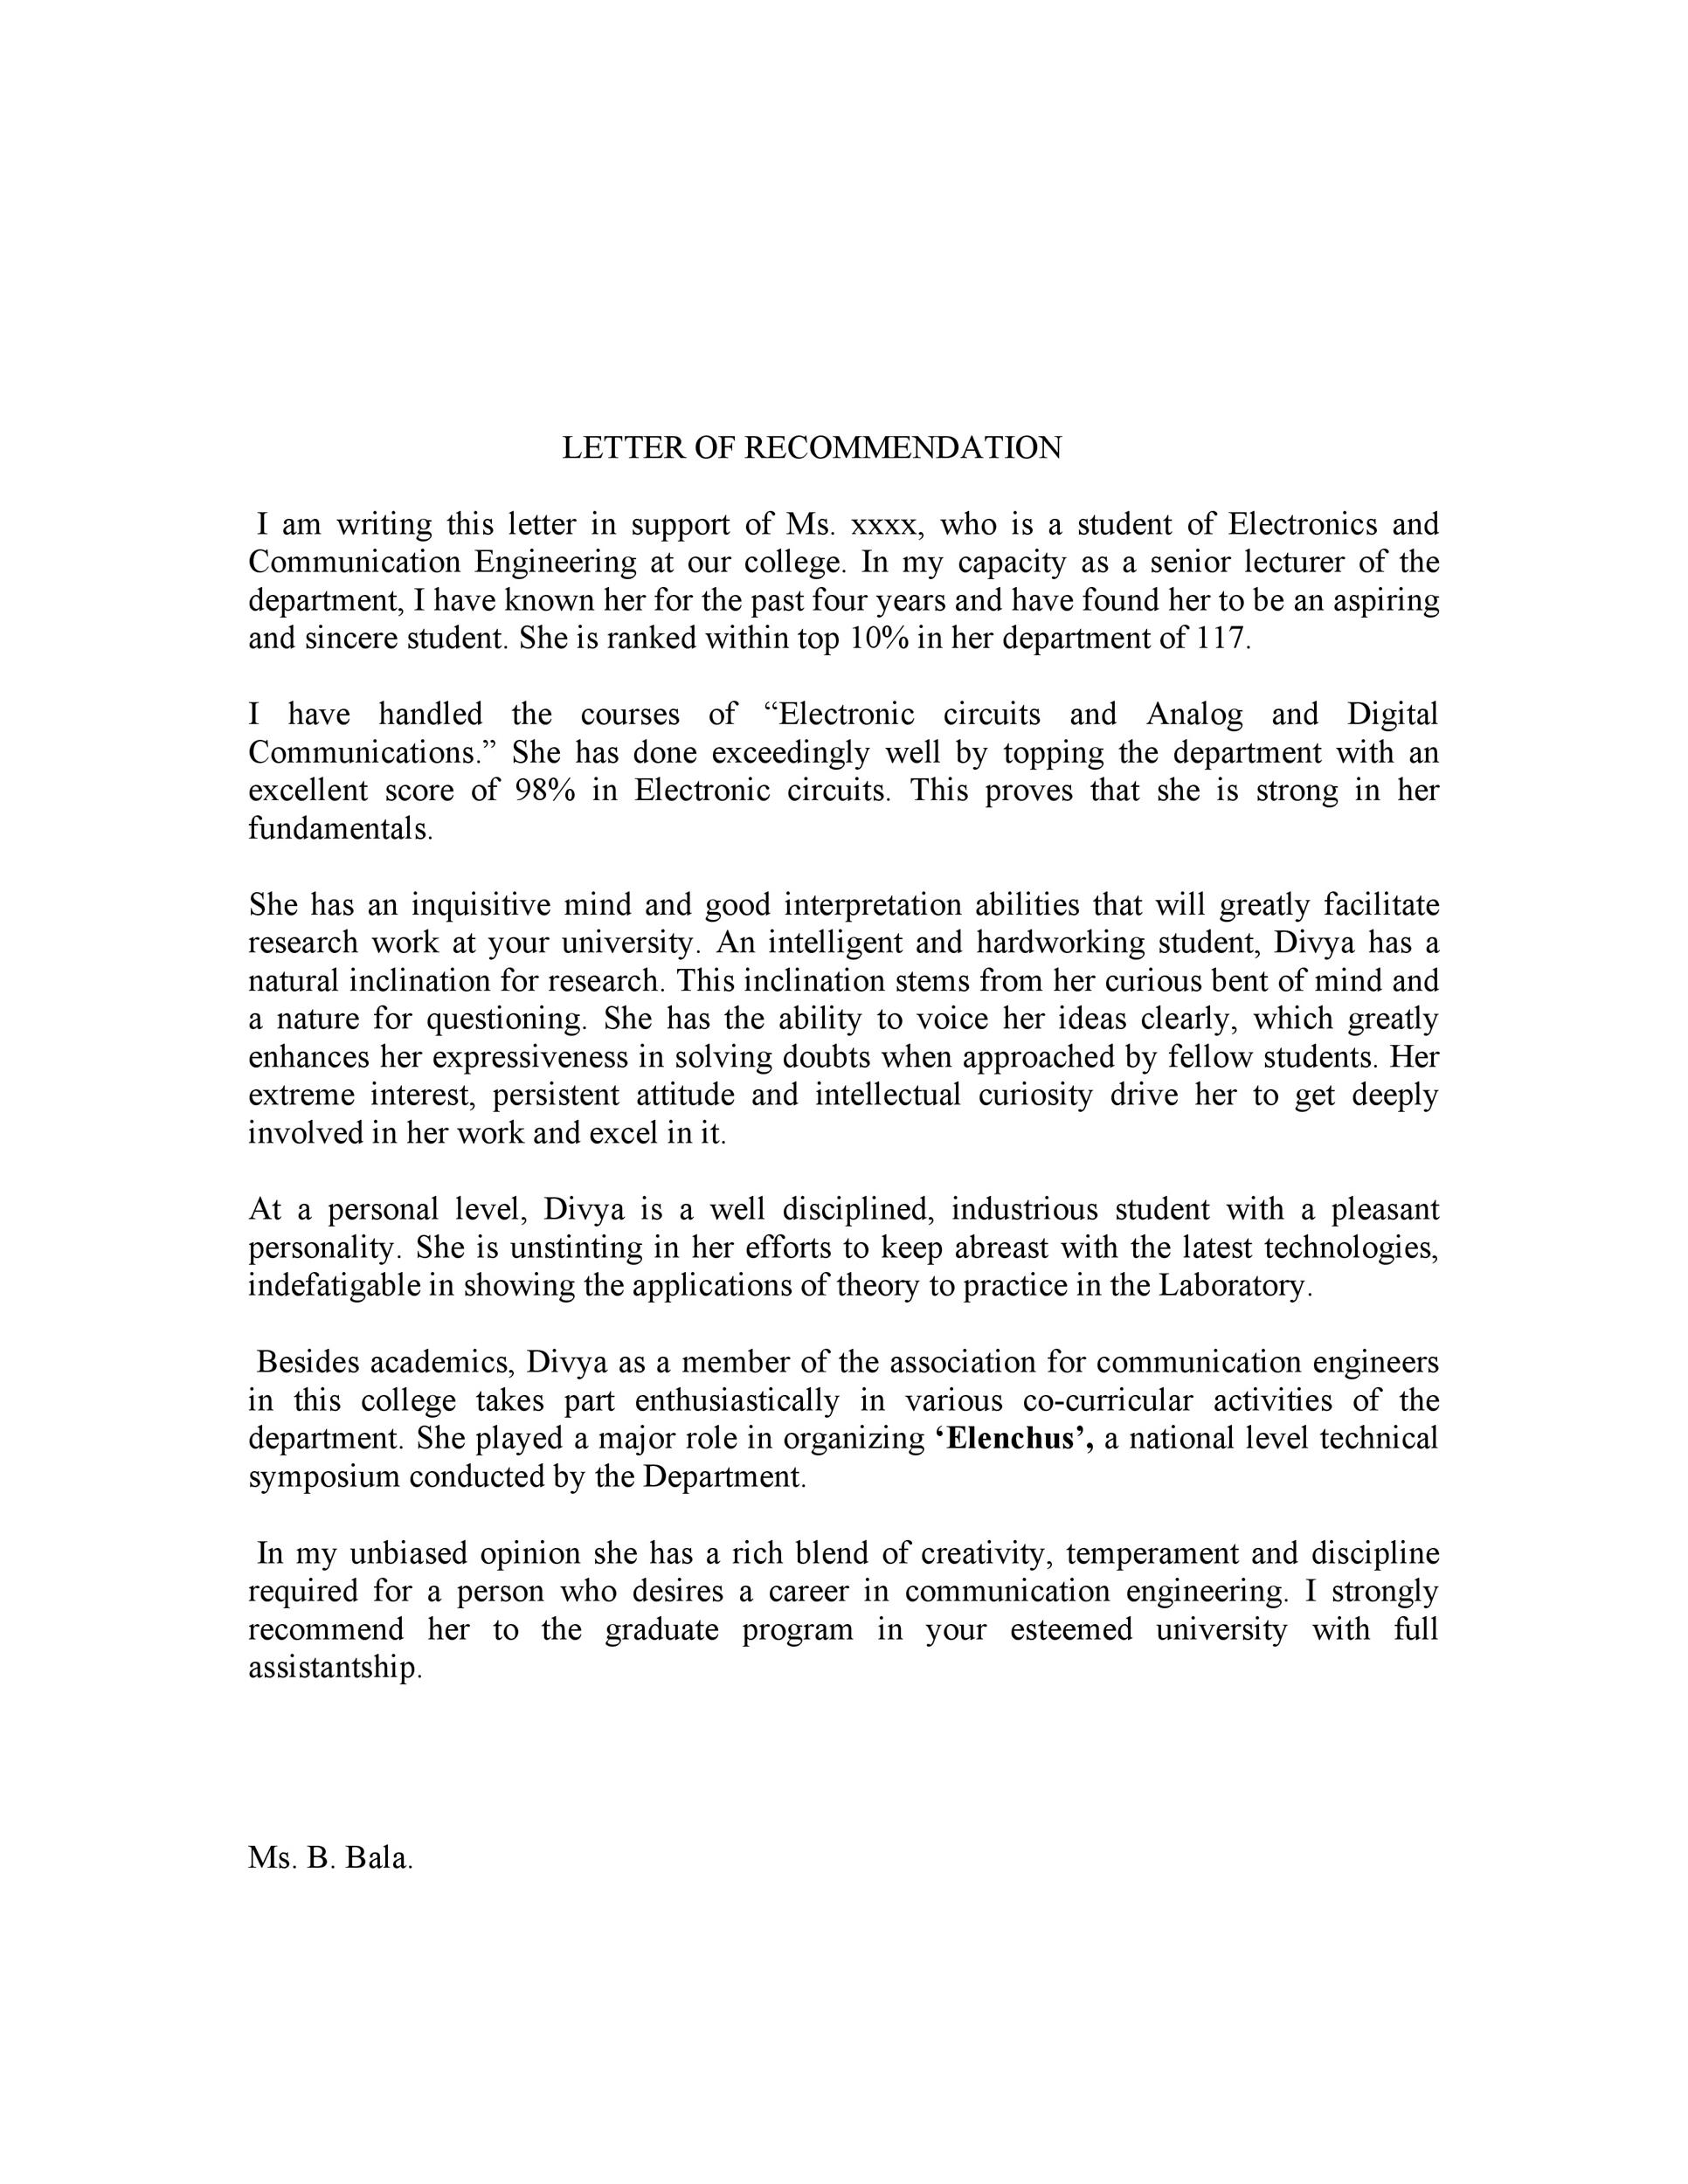 Letter Of Recommendation Template For Student Scholarship from templatelab.com